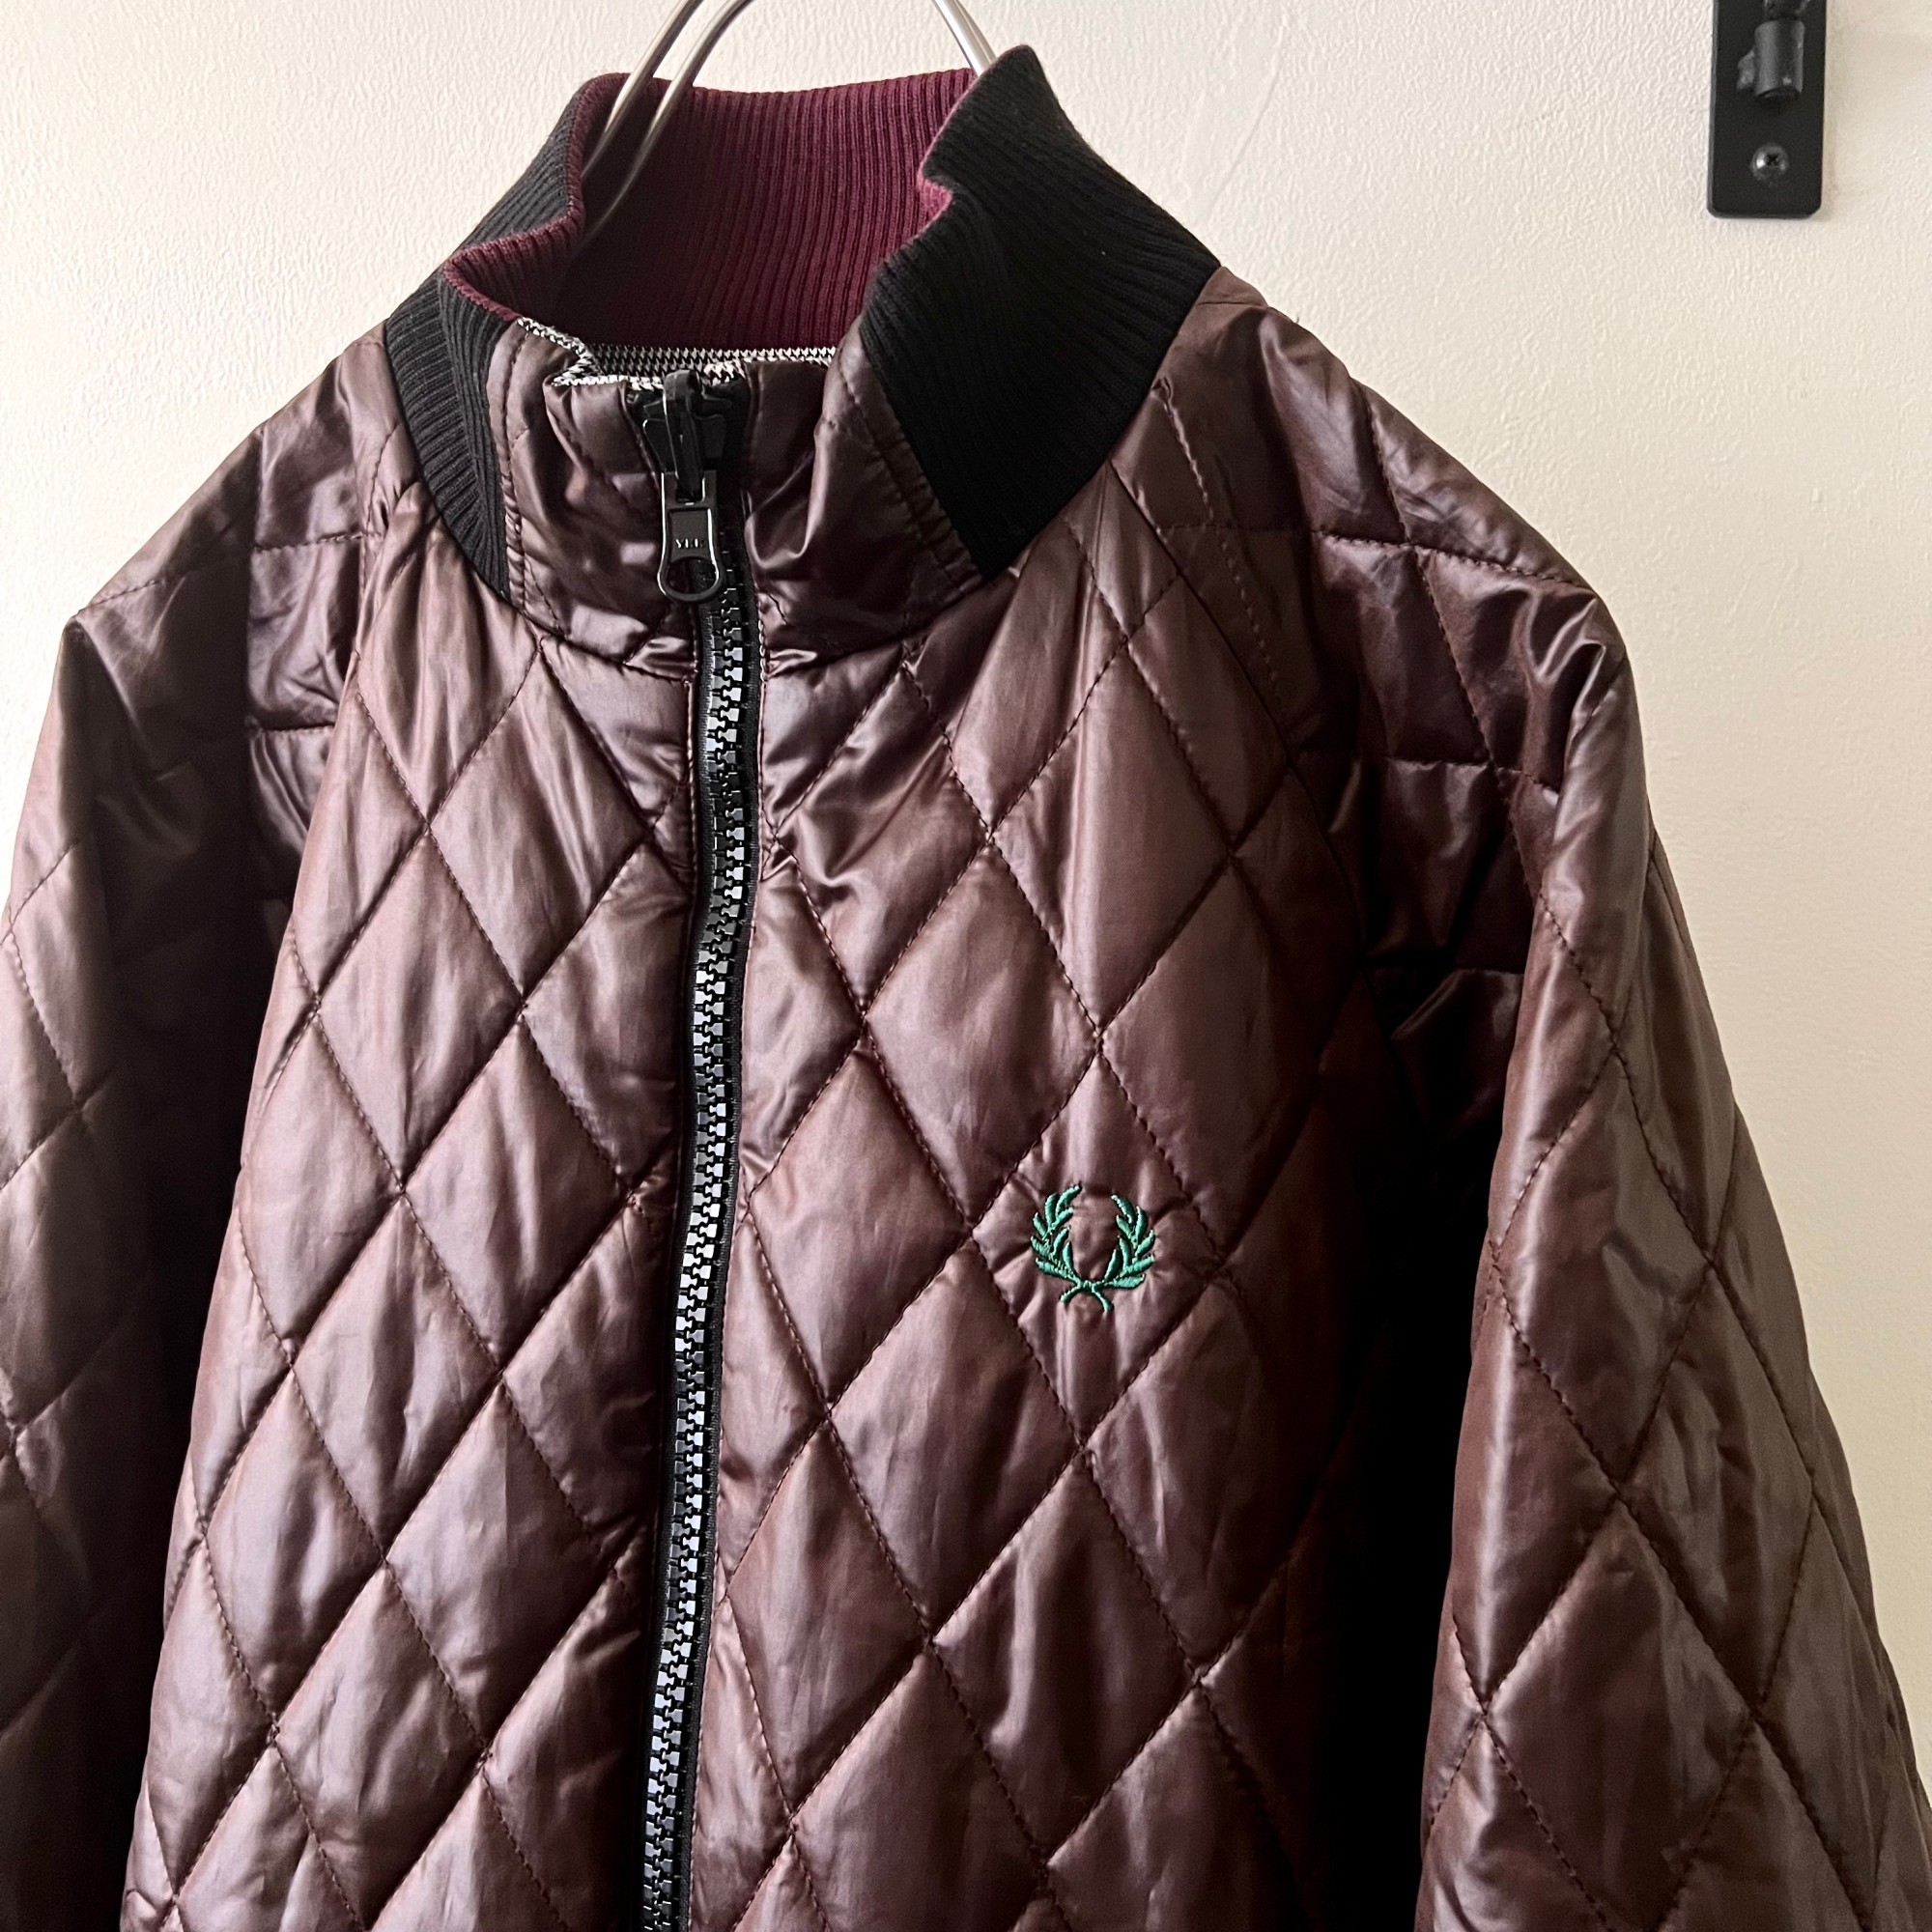 FRED PERRY Logo Reversible JKT